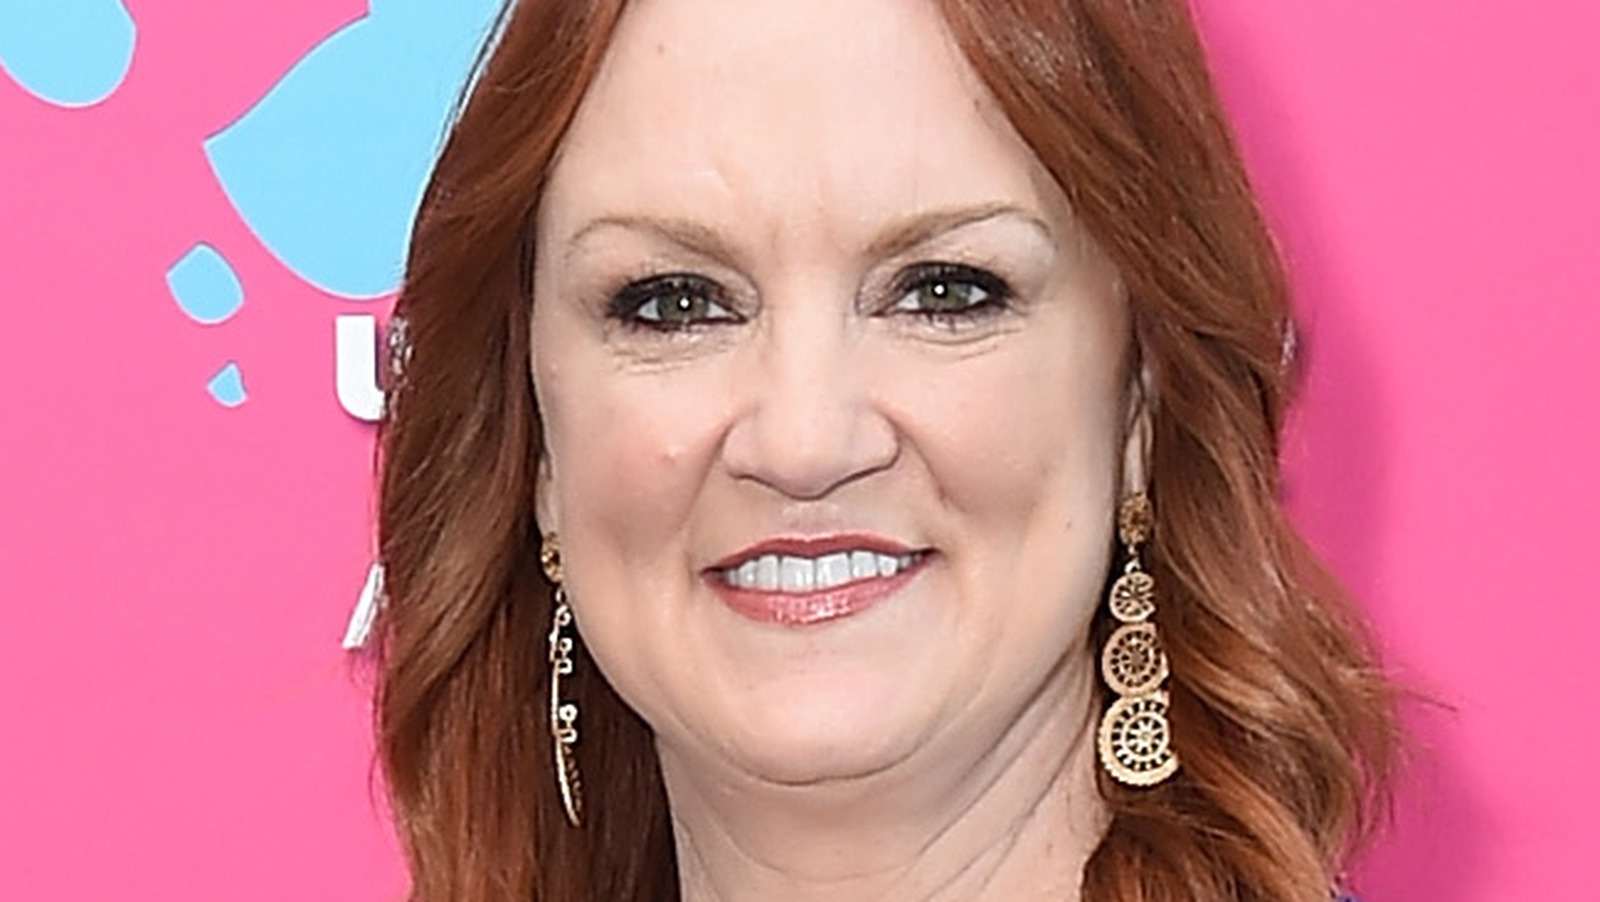 Pioneer Woman's Ree Drummond shows off 60-pound weight loss in